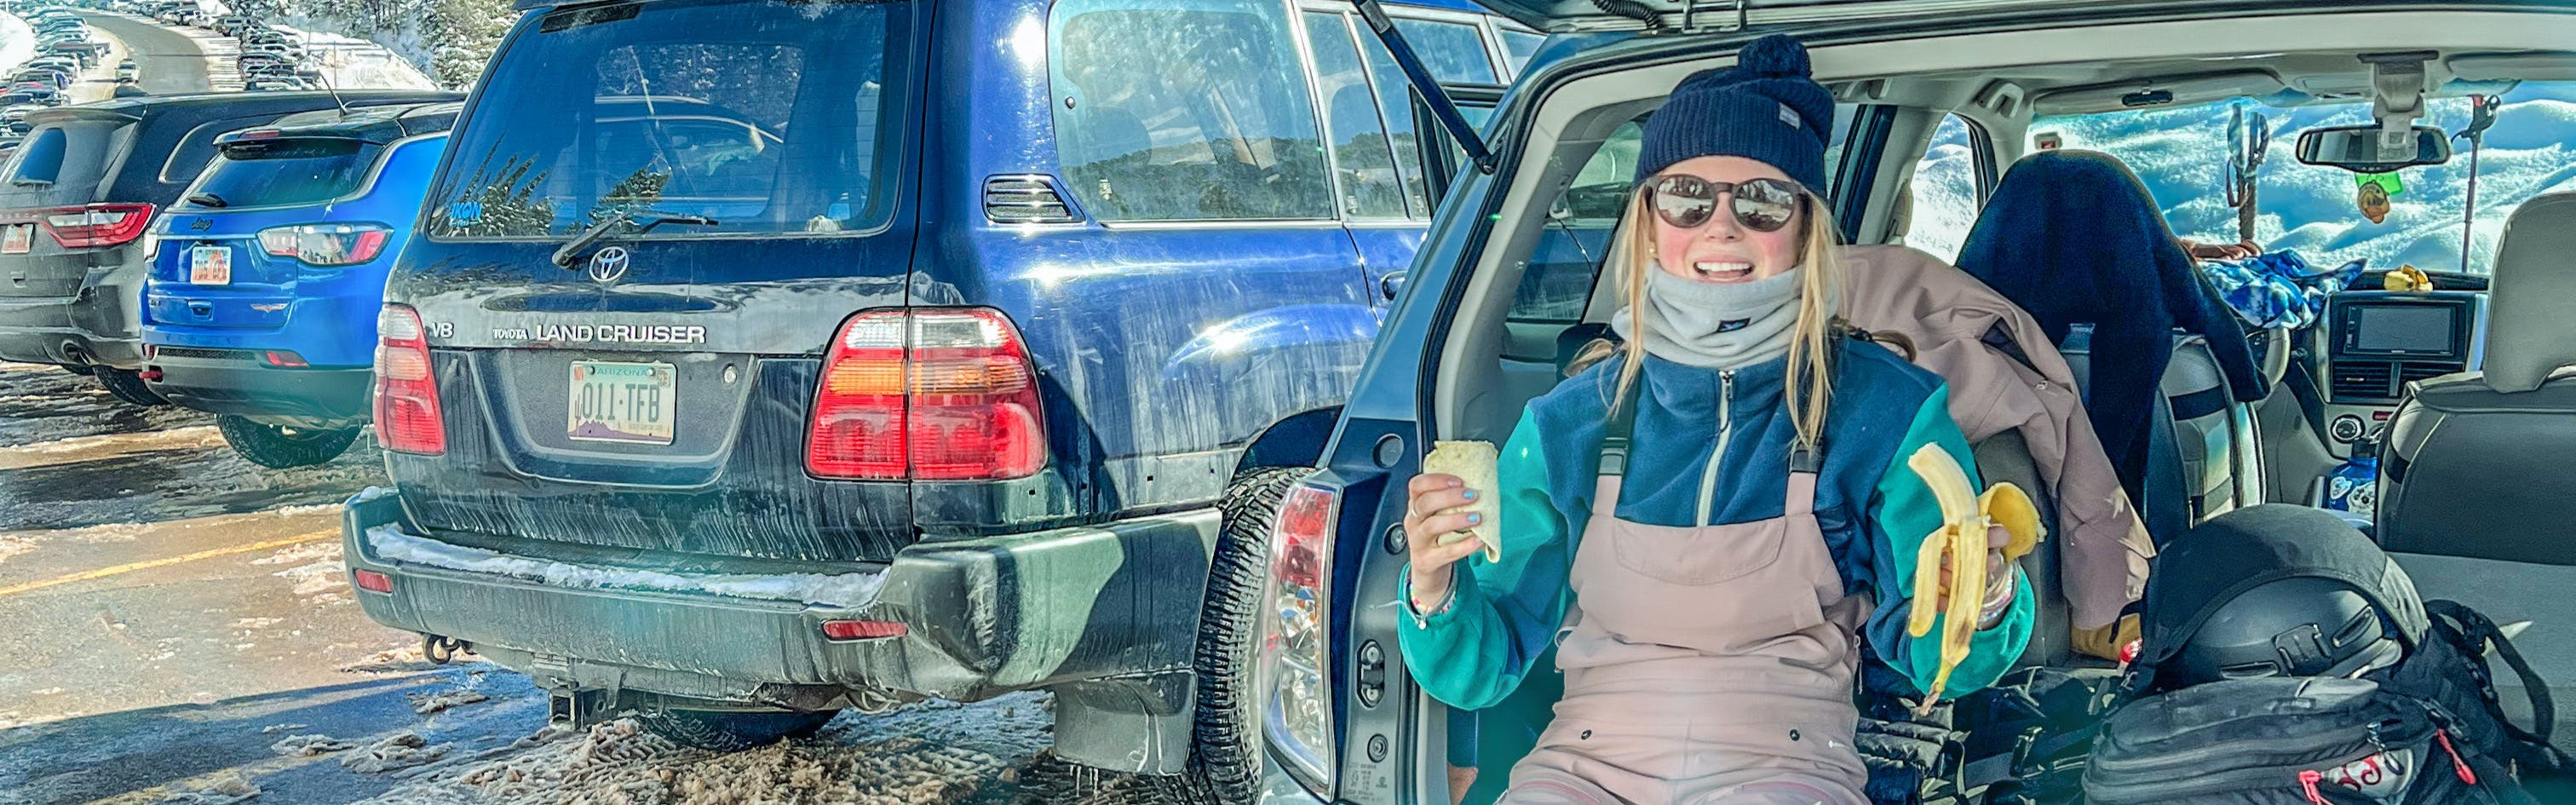 A skier sitting in the back of her car in a ski resort parking lot holding a burrito and a banana.